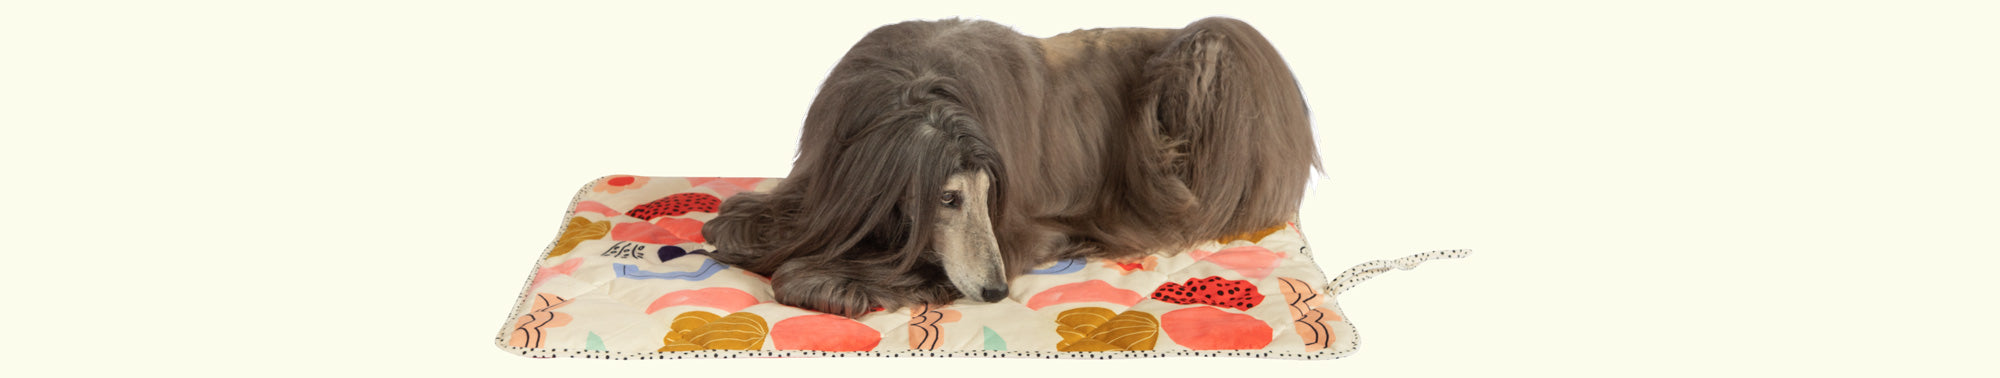 Long haired dog laying on a patterned dog bed